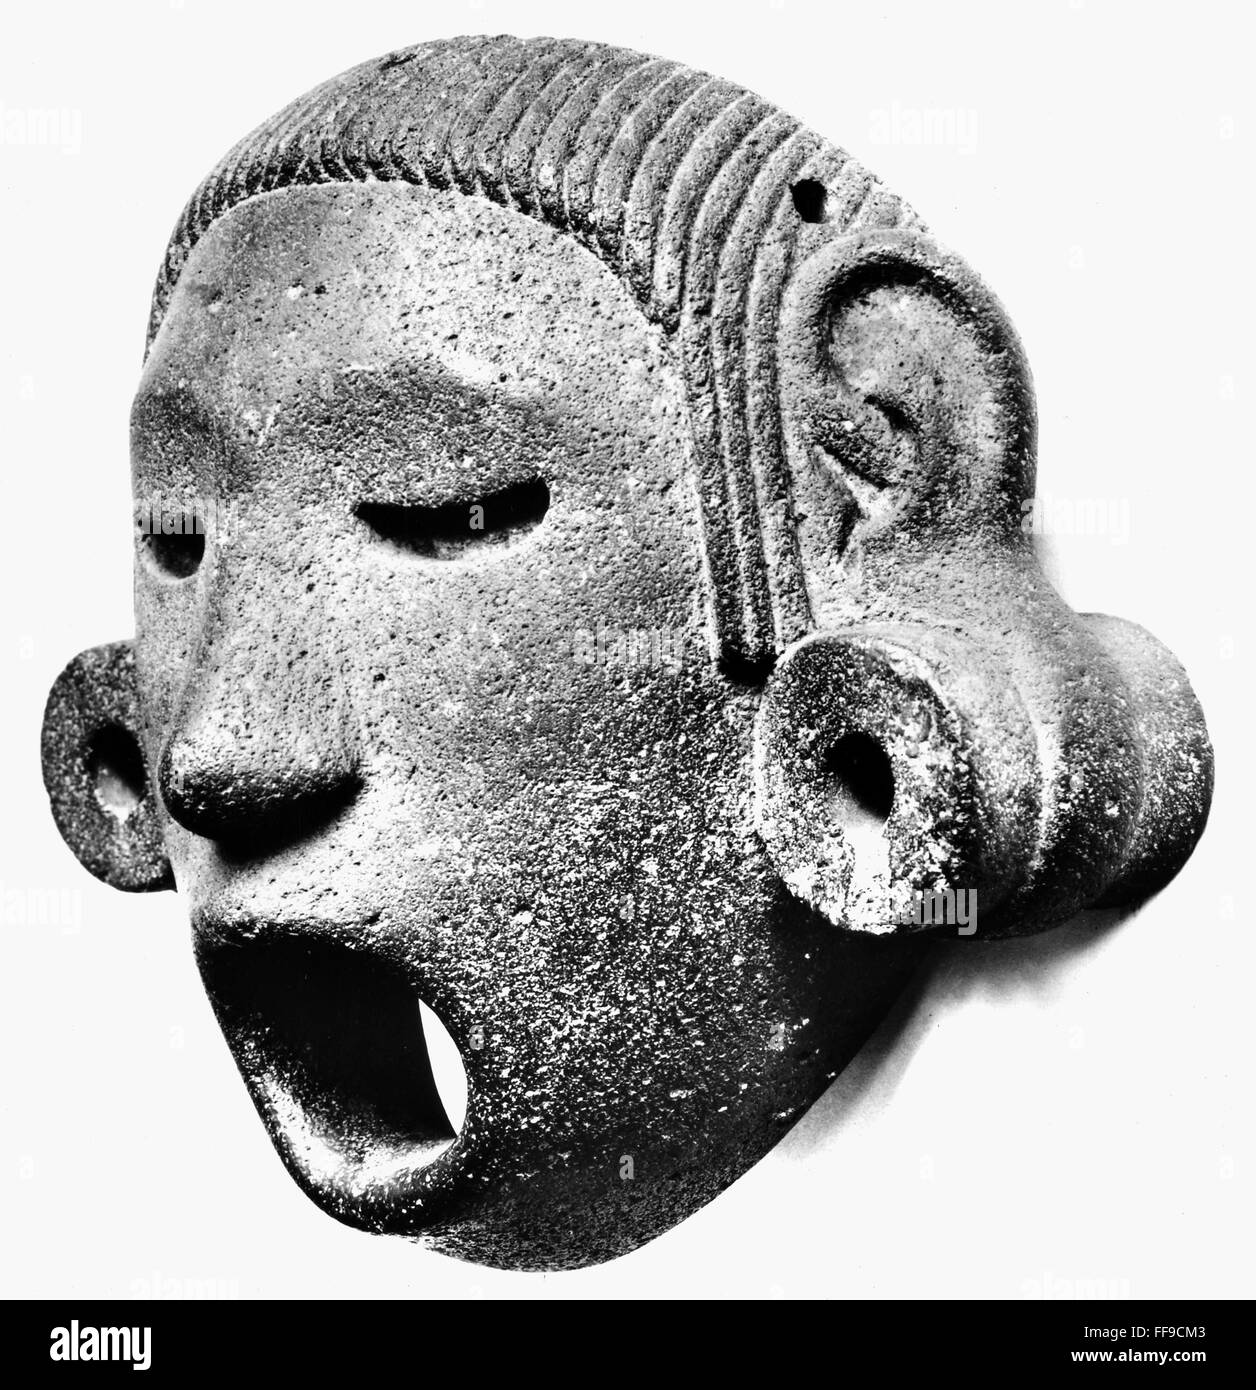 AZTEC MASK, 14th CENTURY. /nStone mask representing the flayed god Xipe Totec, whose priests used to array in the skins of sacrificial victims as a symbol of Aztec, Mexico, probably